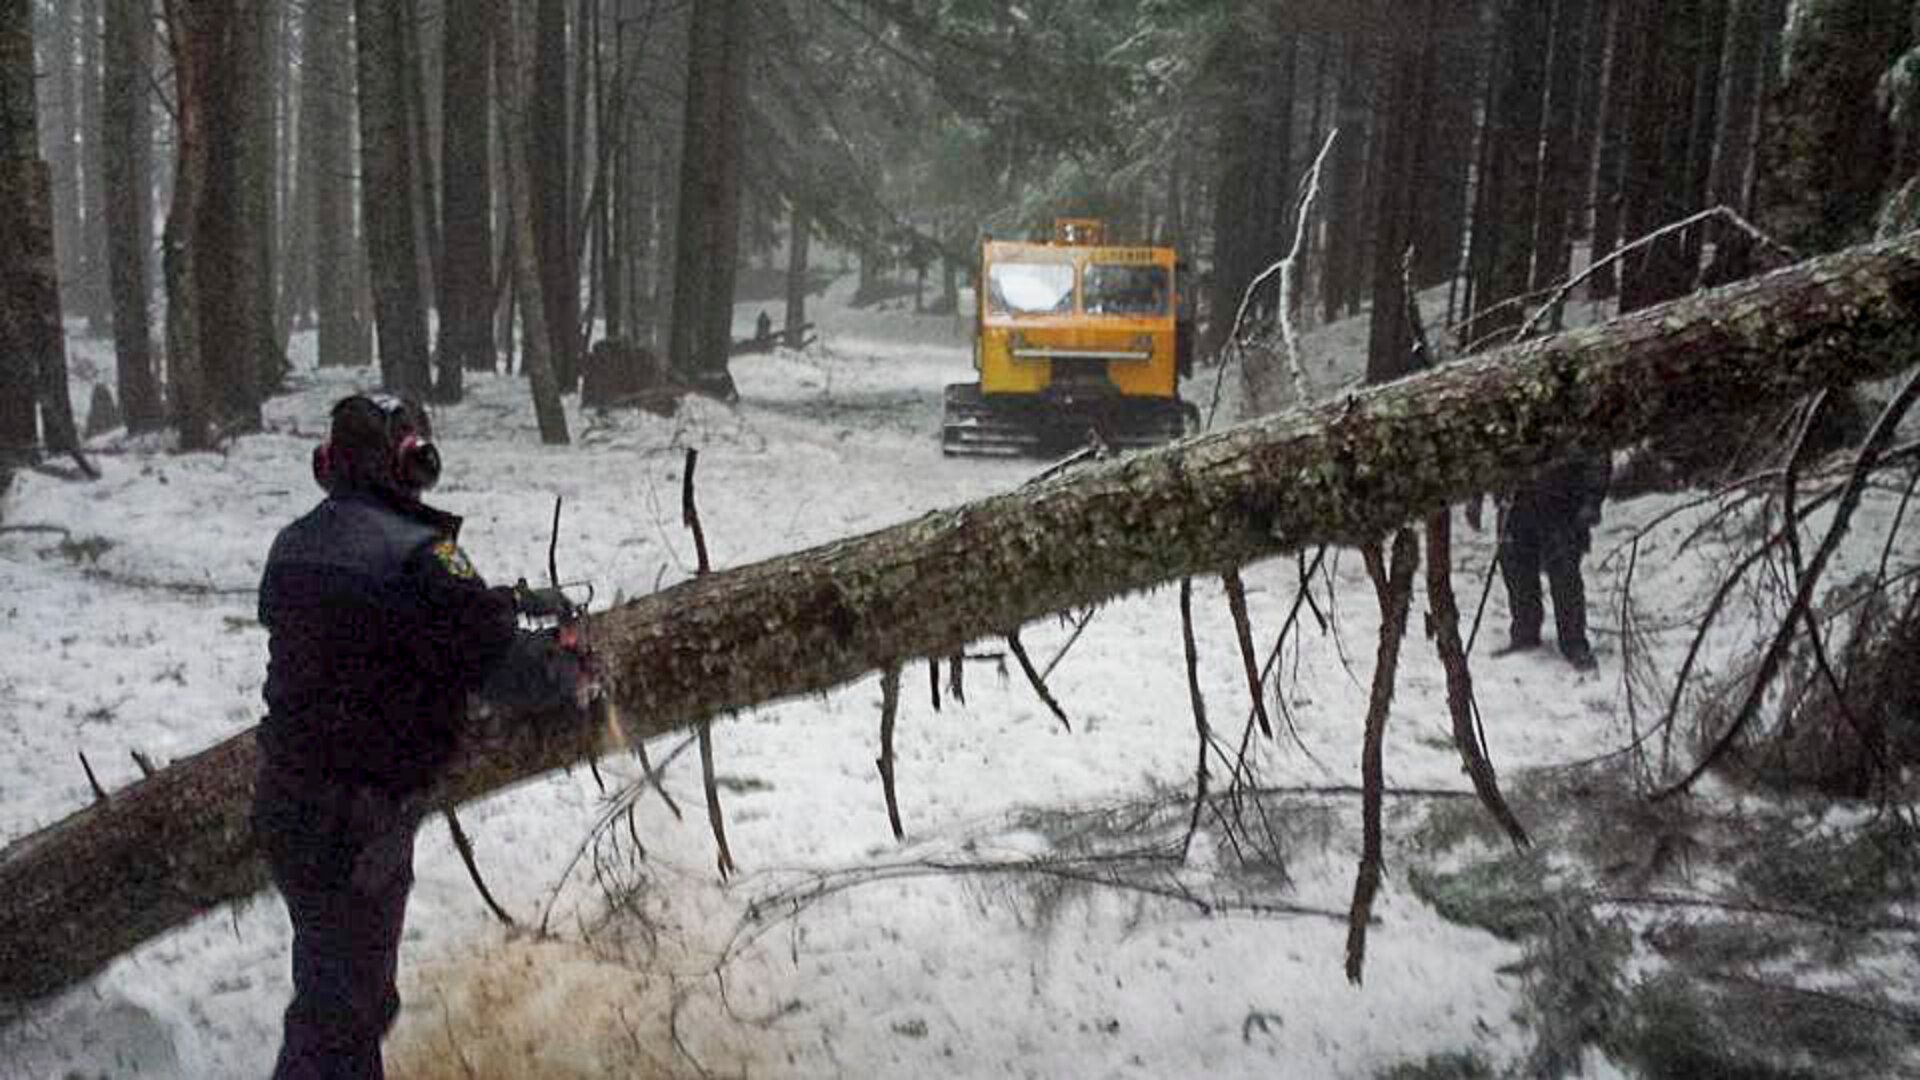 An officer from the King County Sheriff's Office works to clear a fallen tree out of the way of the Snowcat during the rescue operation. The Sheriff's office recently acquired the cat from DLA Disposition Services. Photo provided by the King County Sheriff's Office